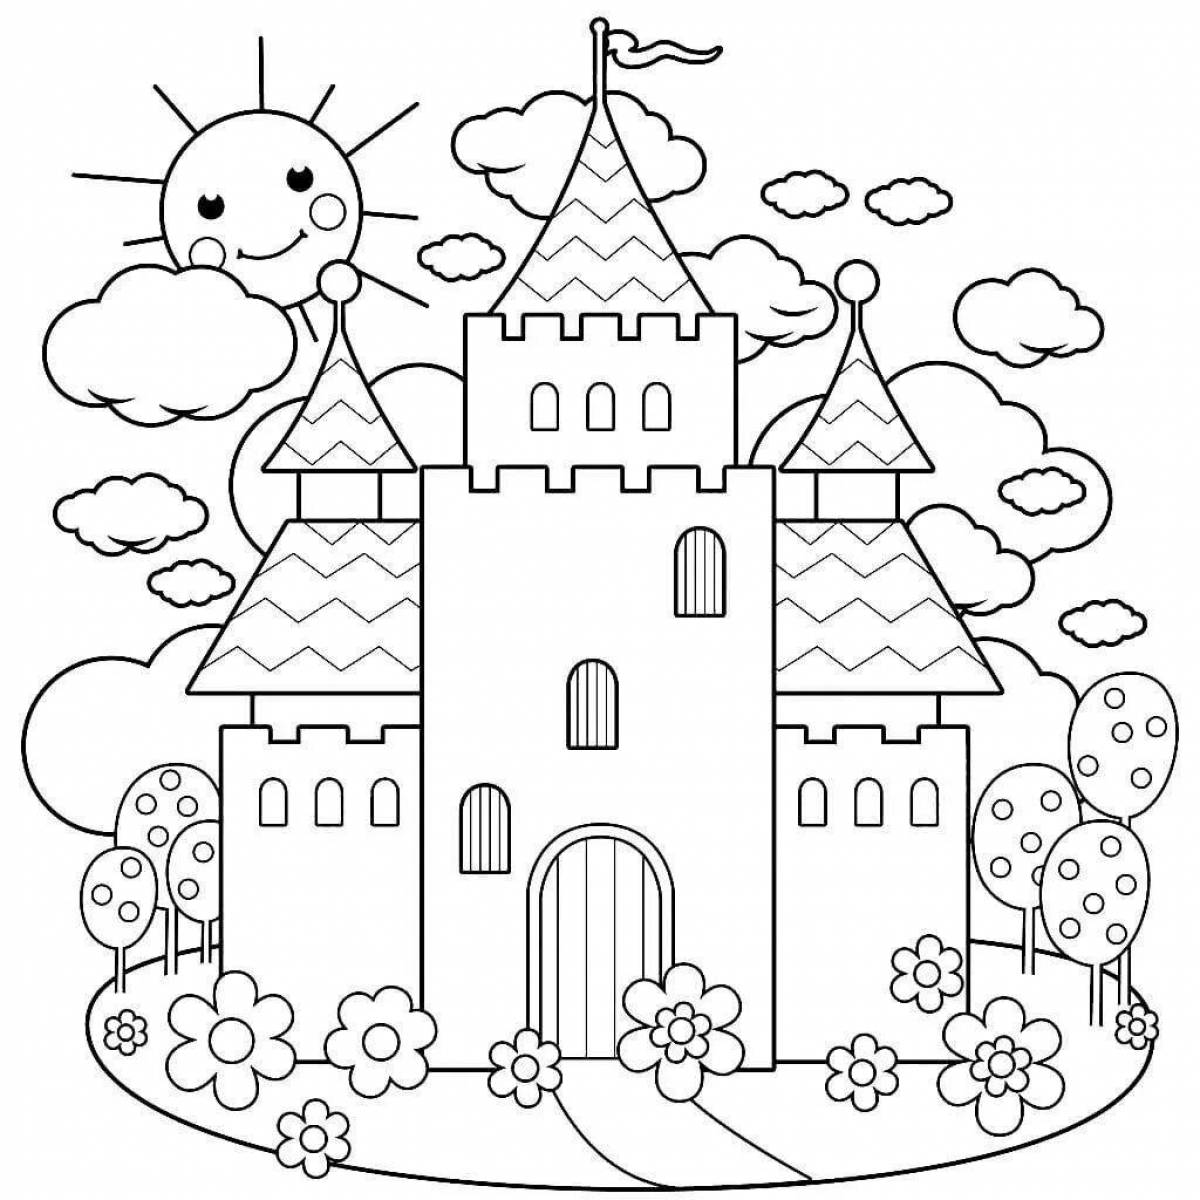 Coloring book dazzling city for kids